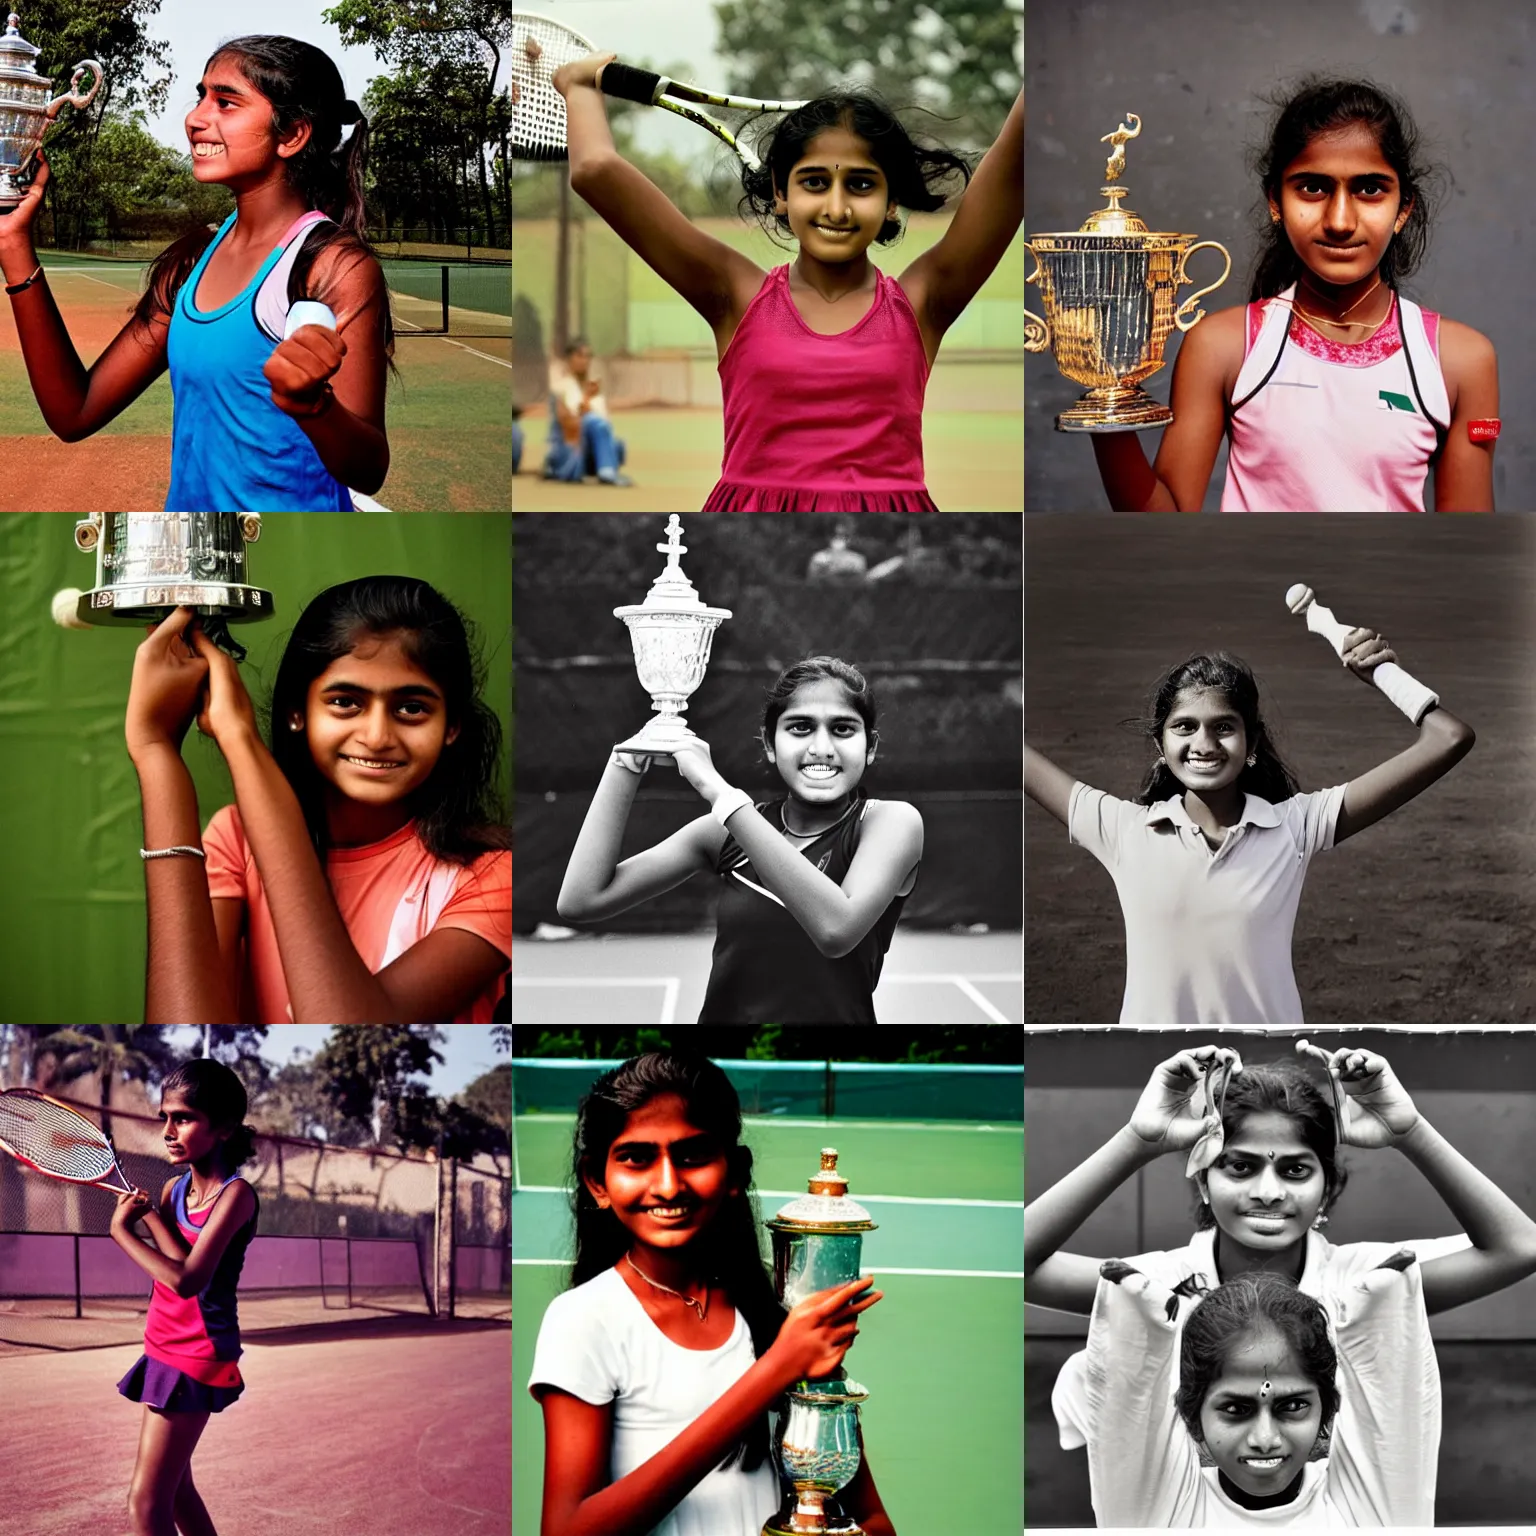 Prompt: A teenage Indian girl tennis player holds up a trophy and celebrates, candid portrait photography by Annie Leibovitz